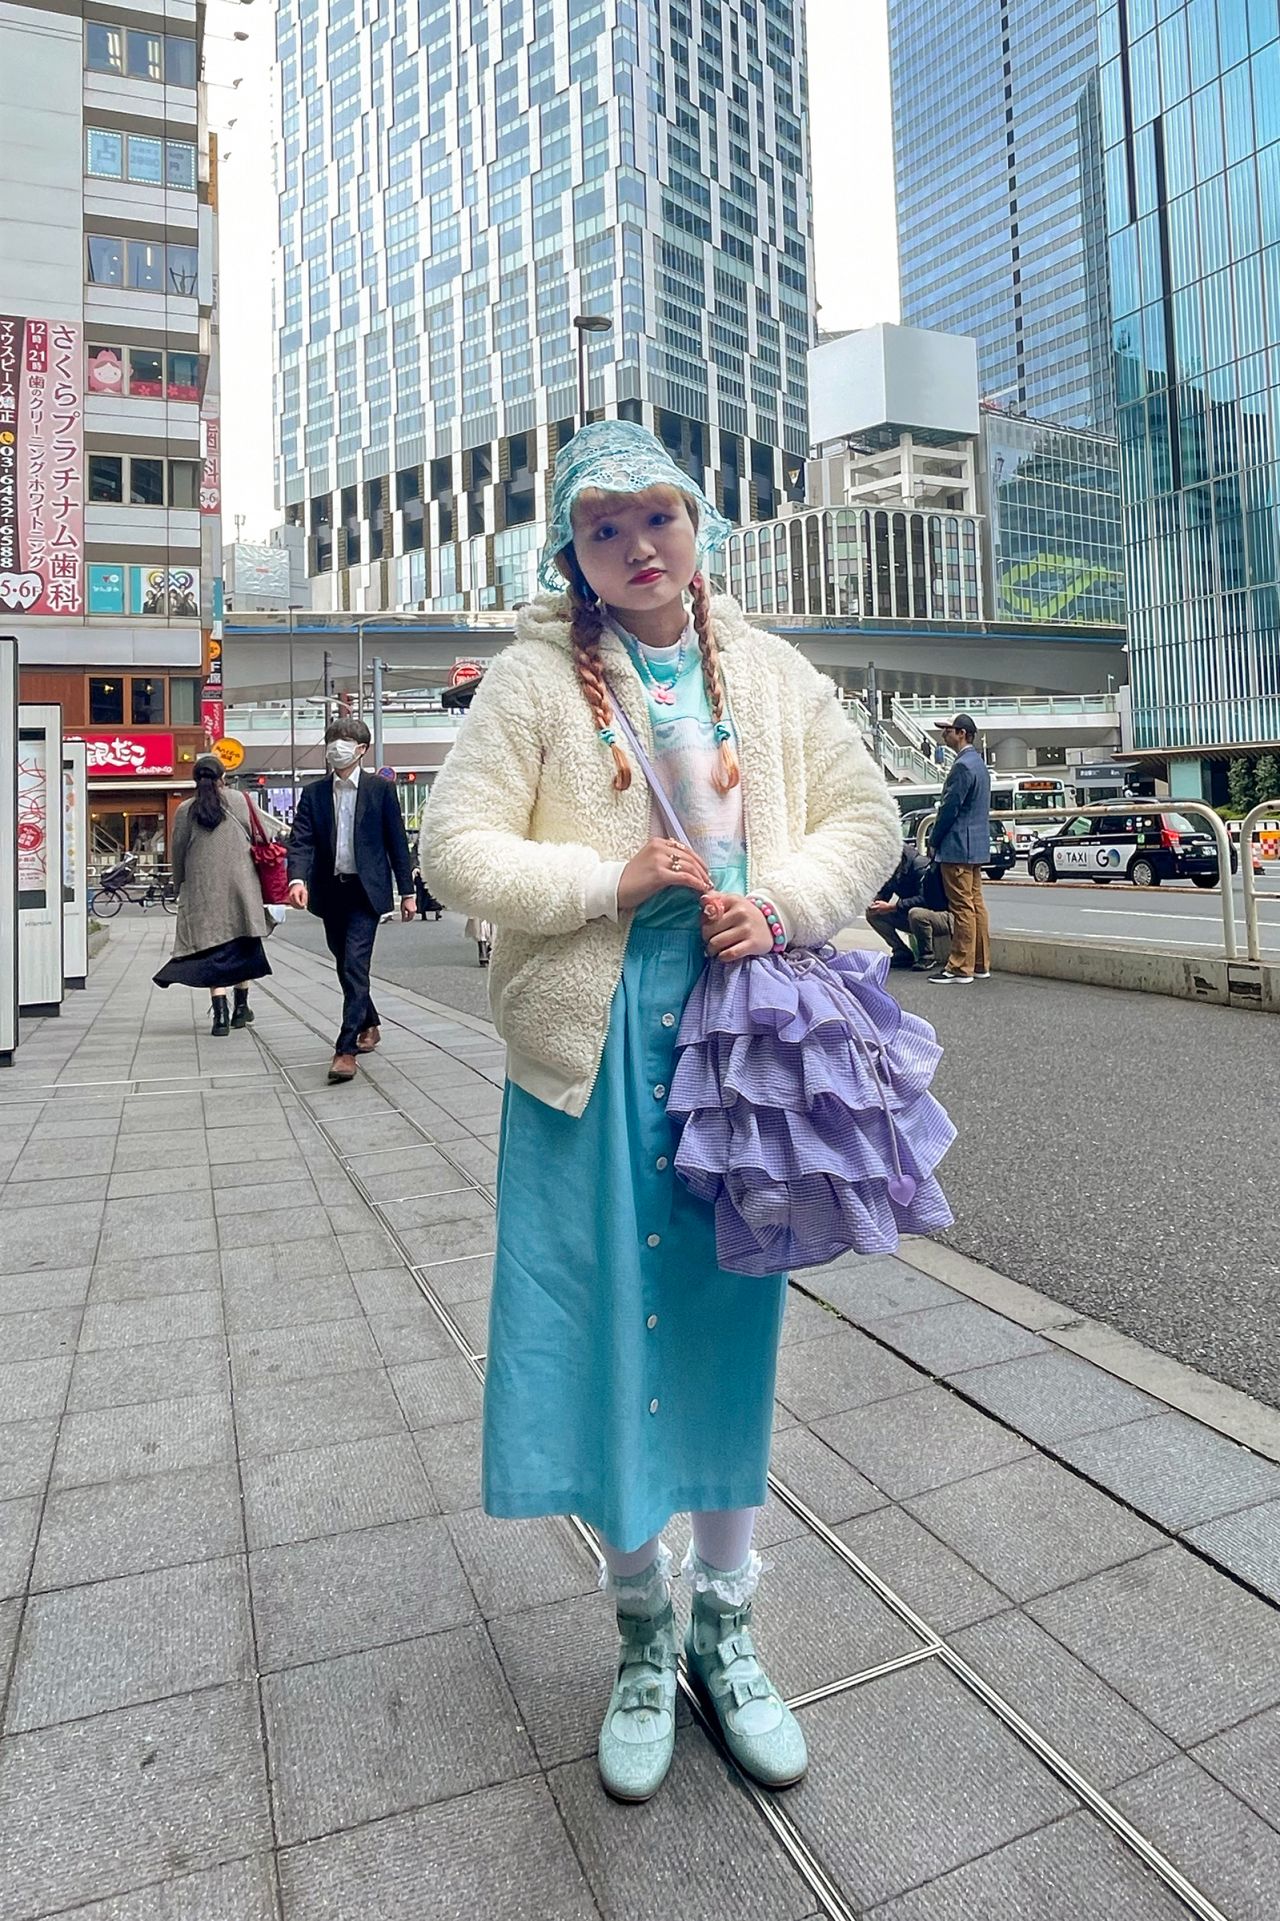 "I think I embody Japanese fashion," said Ena. "I can wear whatever I want here (in Japan) without standing out."